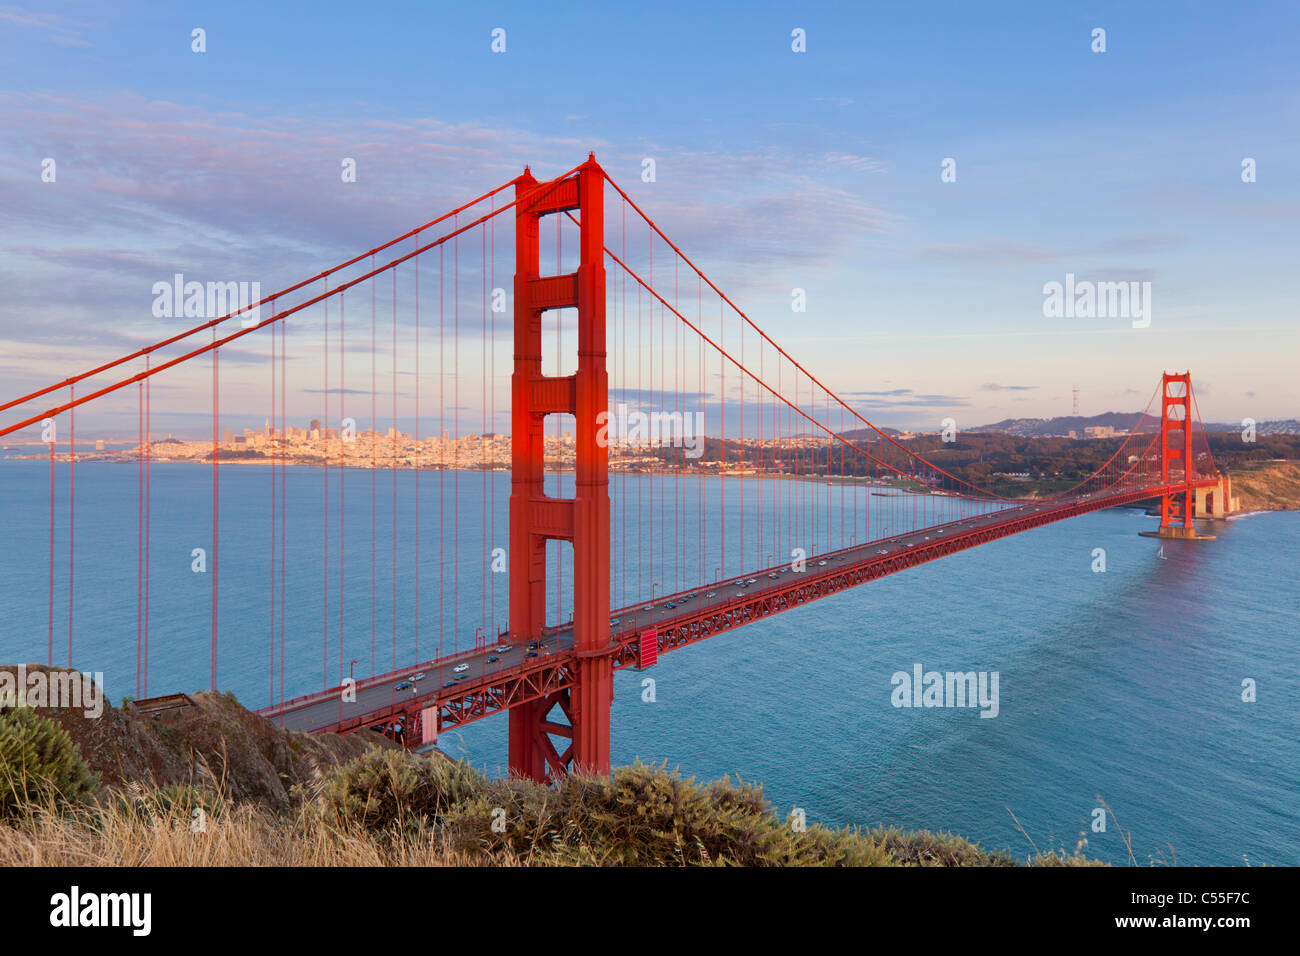 San Francisco The Golden Gate Bridge with traffic crossing the bridge to and from Marin County City of San Francisco California Stock Photo